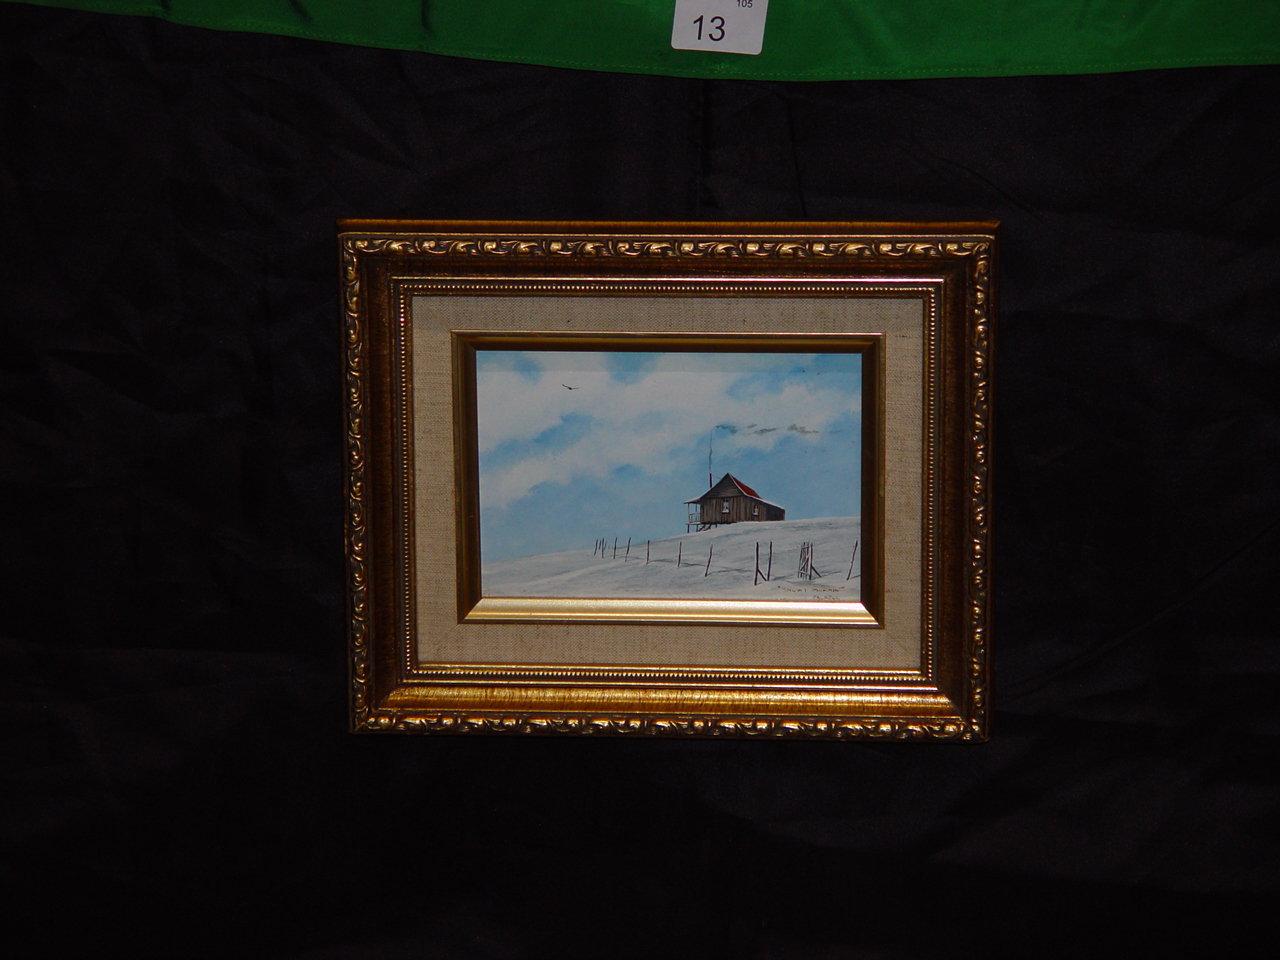 National Geographic Society banner and framed Oil Painting, “Snowy Mornin’” signed by Dutch Falkell